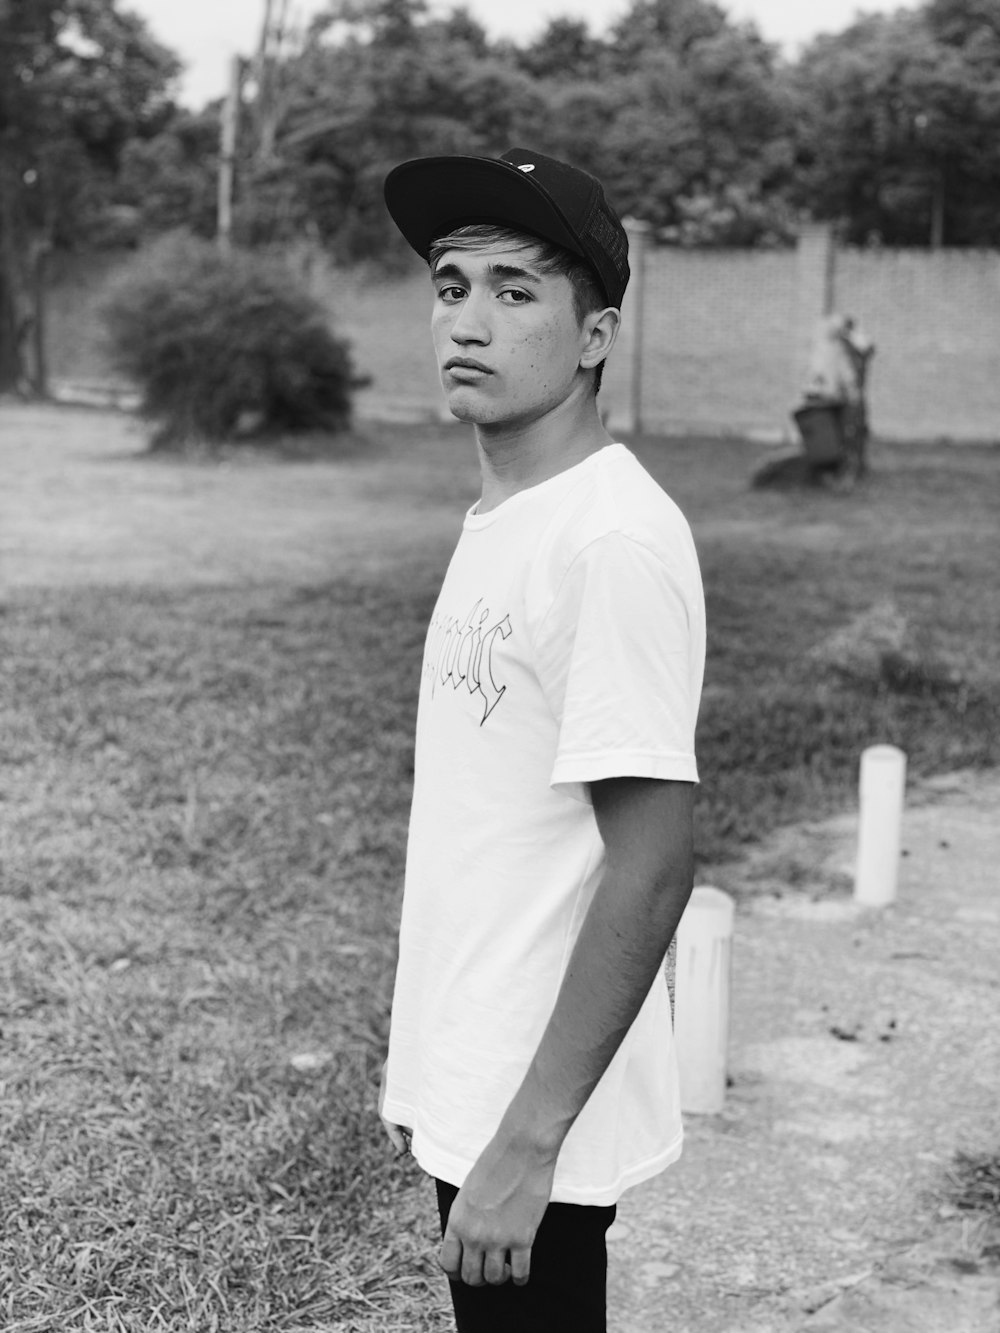 grayscale photo of boy in white crew neck t-shirt and black cap standing on grass